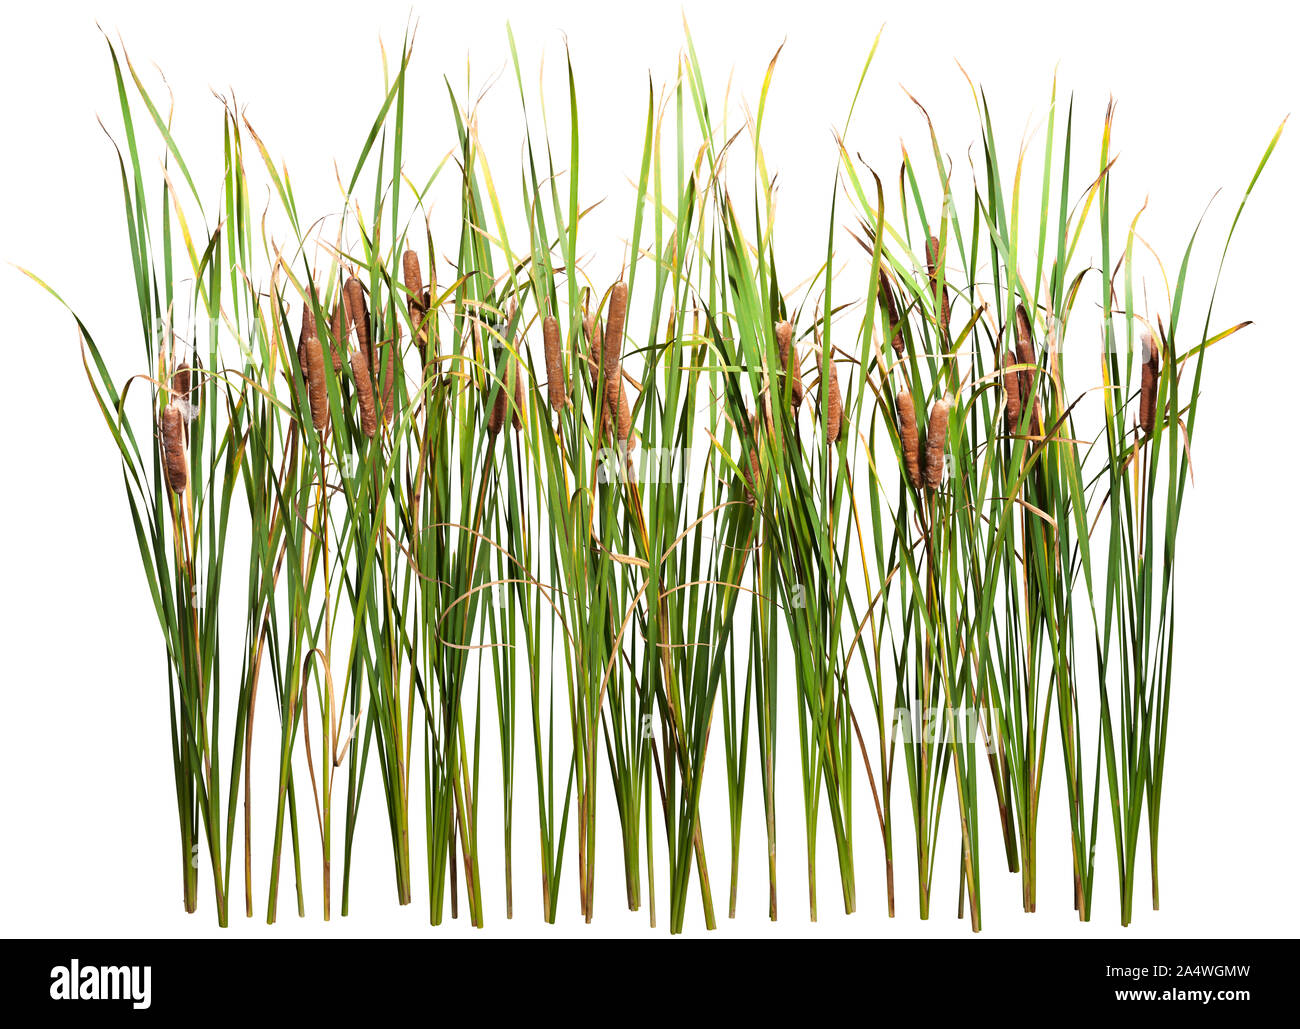 Cut out plant. Reed grass. Cattail and reed plant isolated on white background. Cutout distaff and bulrush. High quality clipping mask. Stock Photo